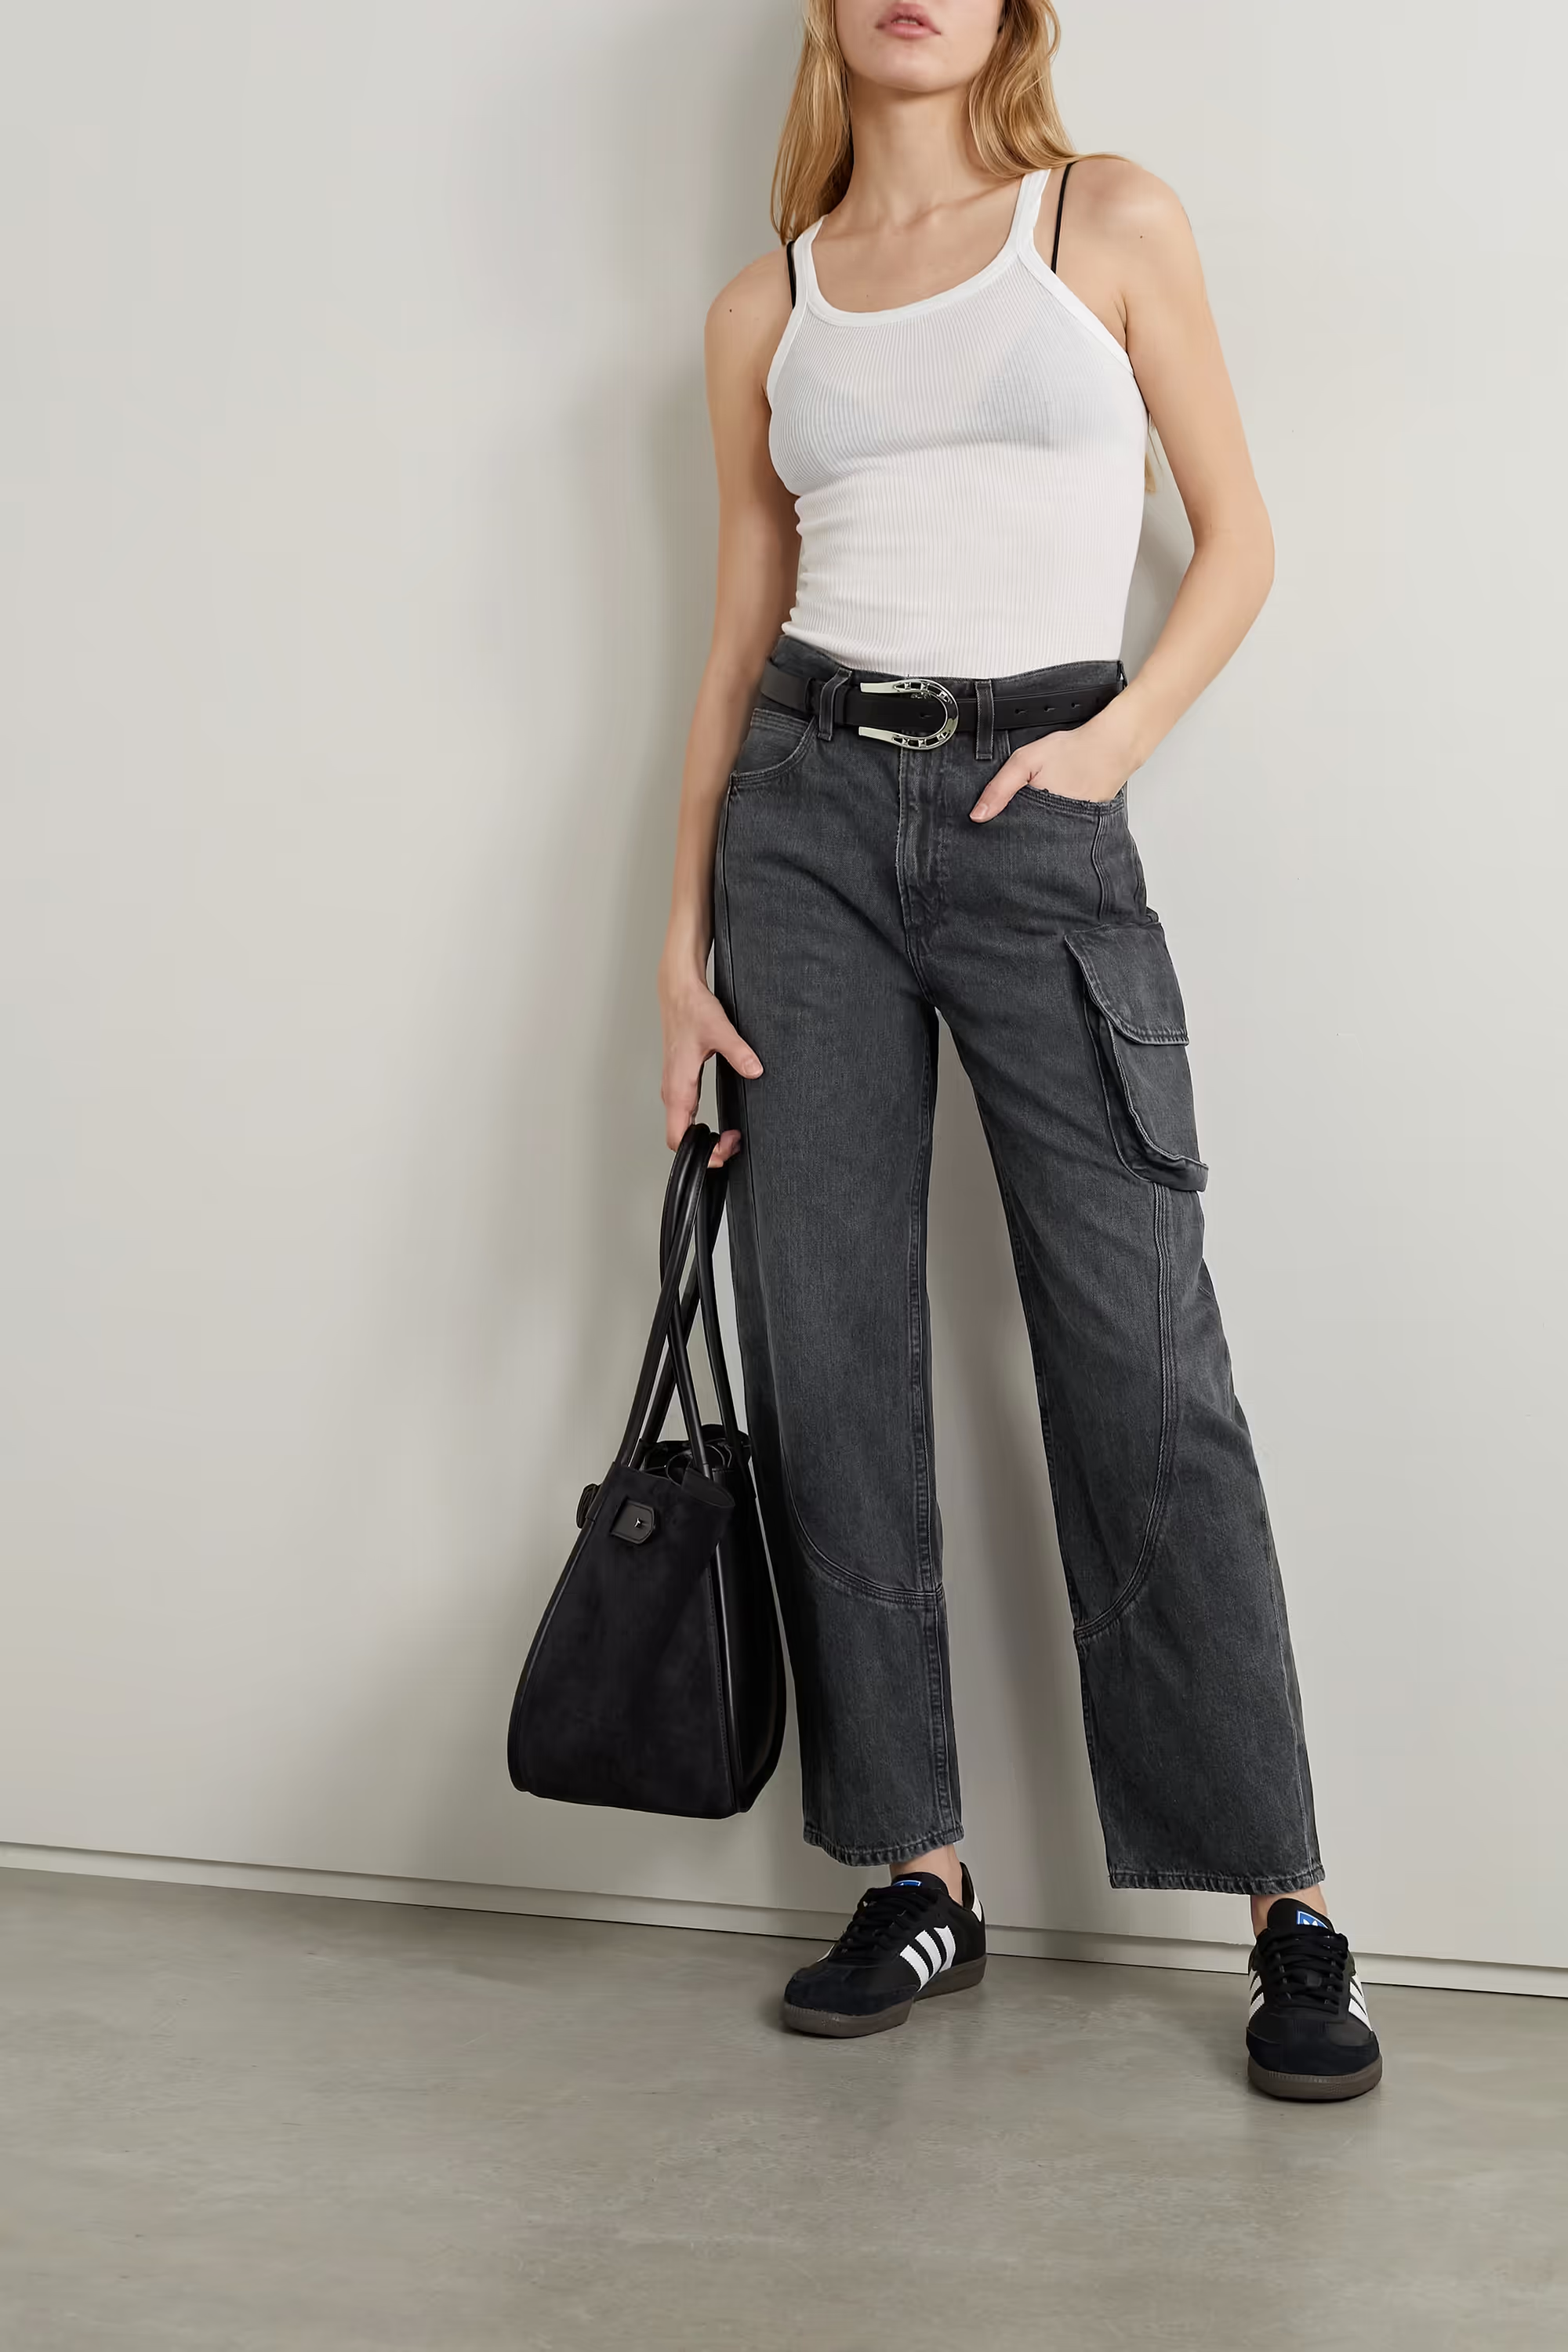 HIGH WAISTED COLORED SUPER-STRETCH JEANS BLACK - LOVER BRAND FASHION